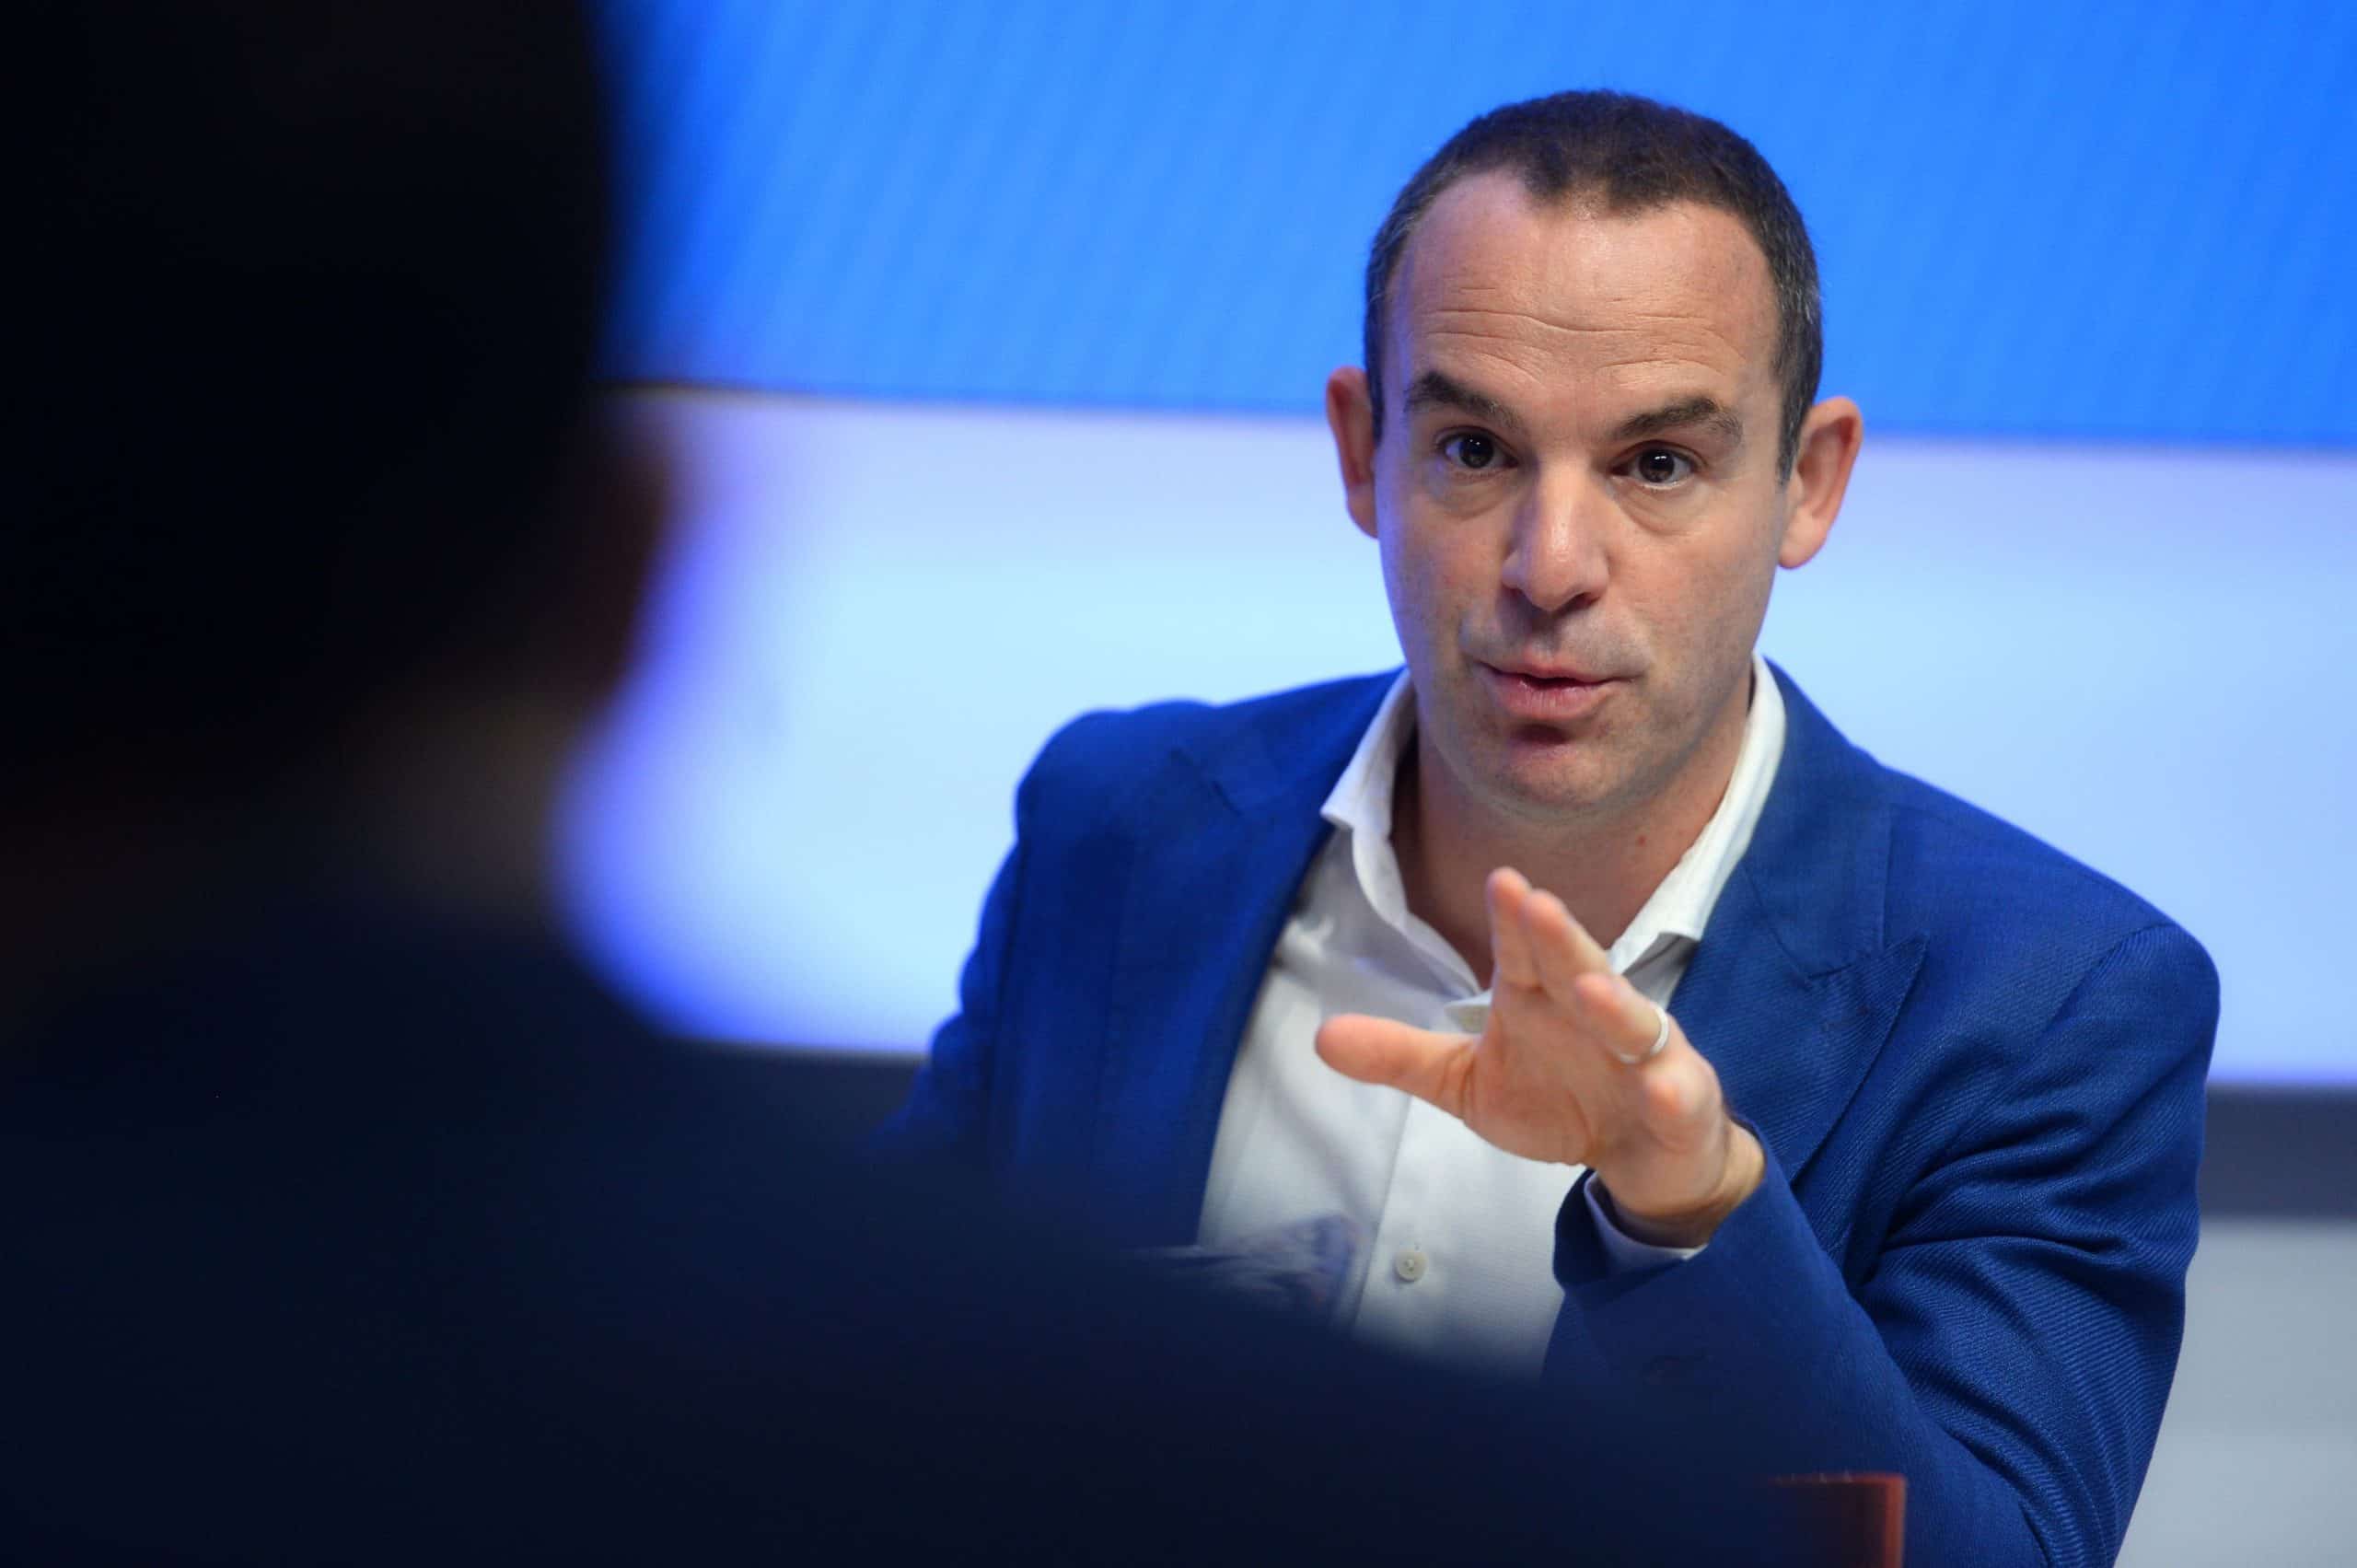 Martin Lewis says ‘we need to stop blaming the cost of living crisis on Ukraine’